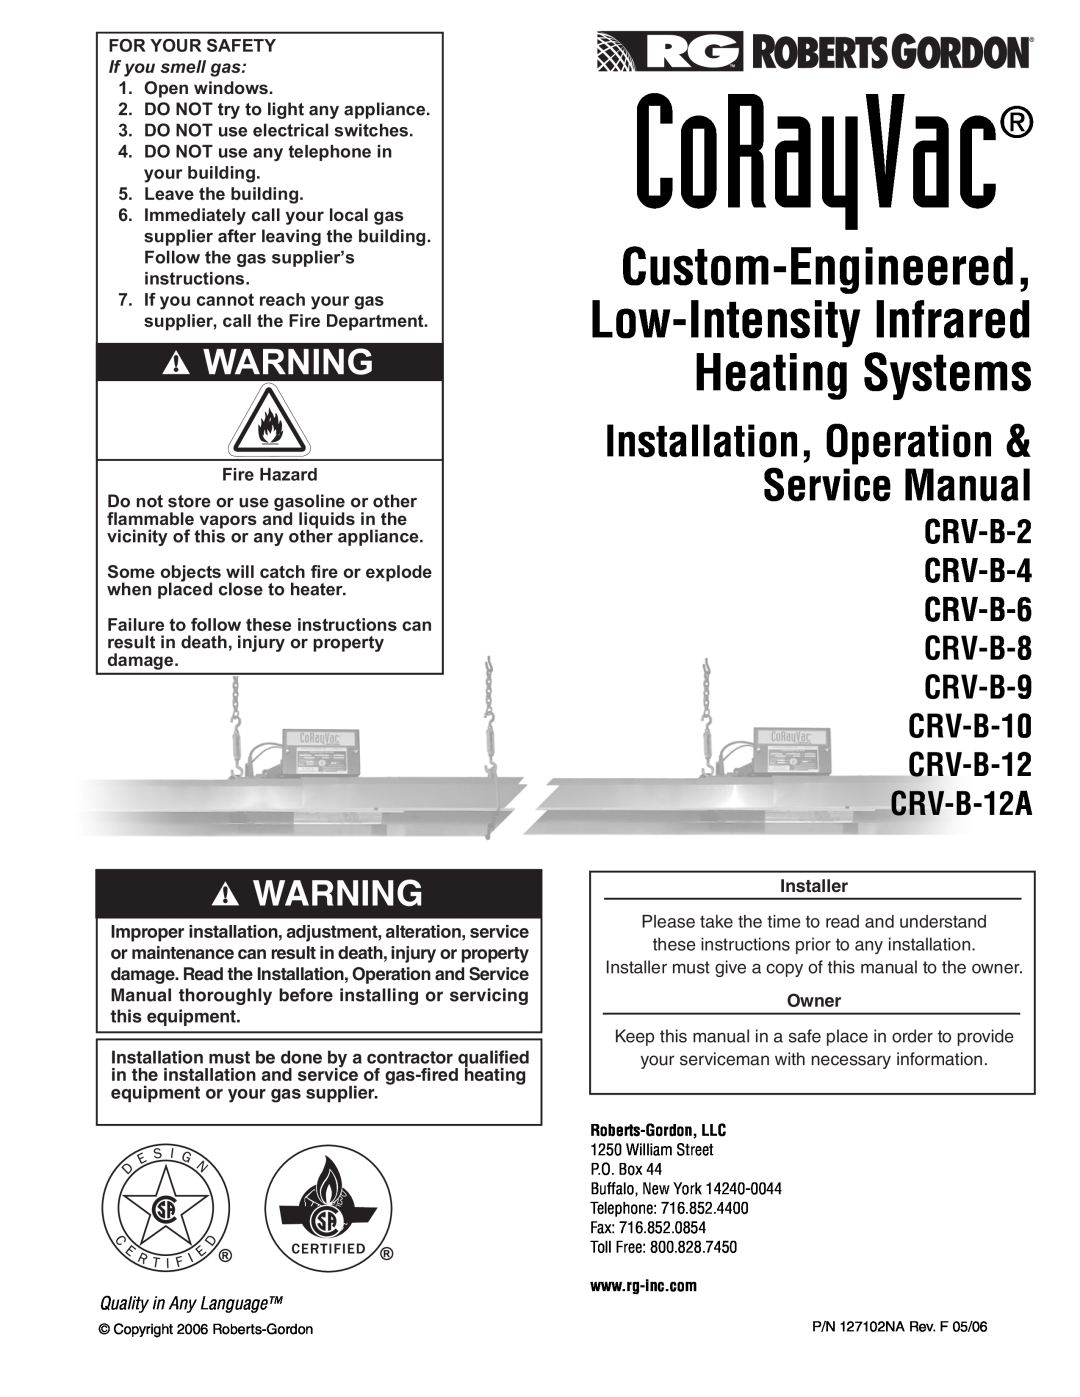 Roberts Gorden CRV-B-9 service manual CoRayVac, Heating Systems, Custom-Engineered Low-IntensityInfrared, If you smell gas 